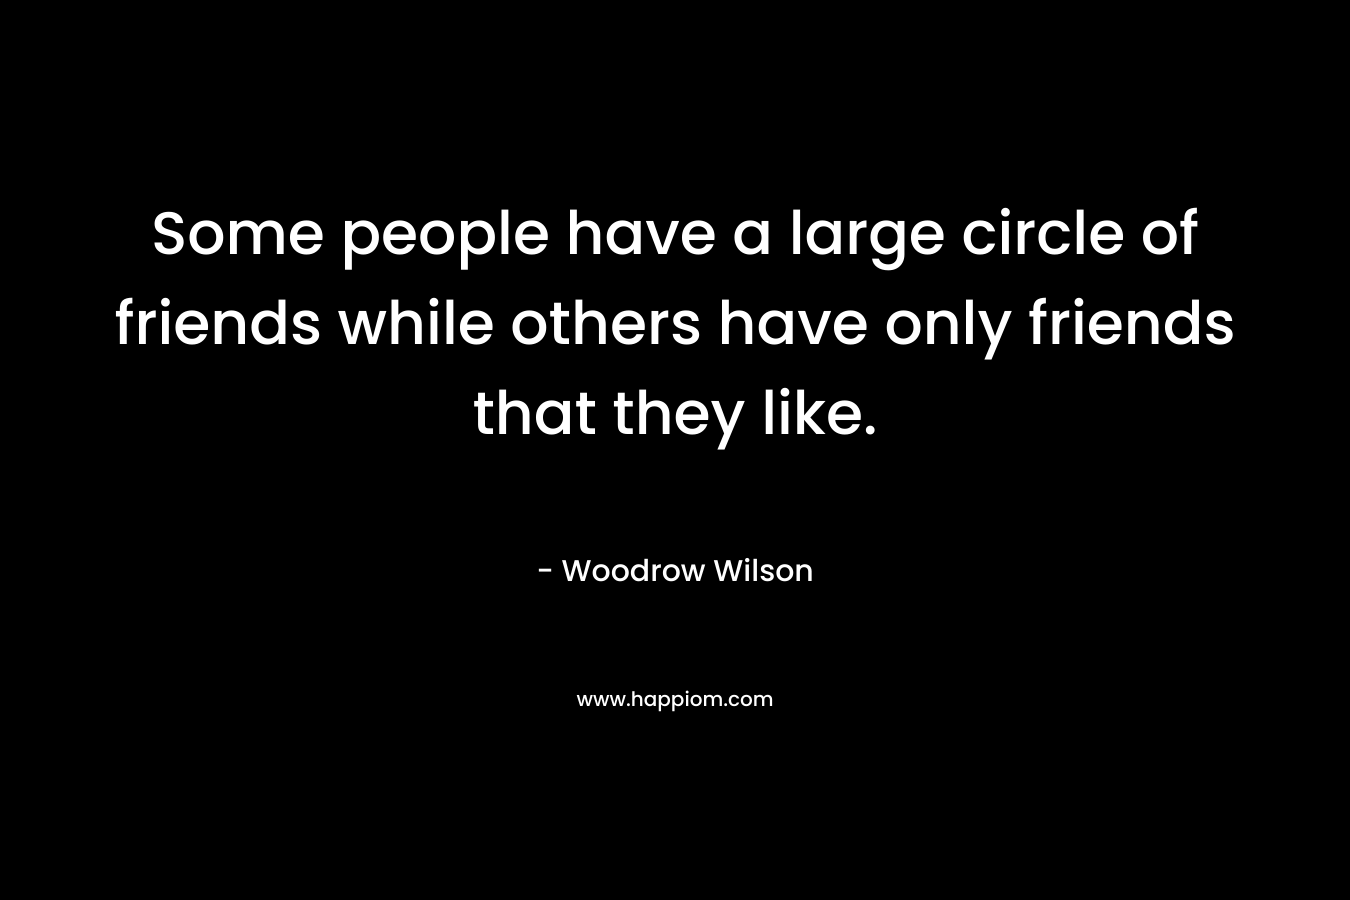 Some people have a large circle of friends while others have only friends that they like. – Woodrow Wilson